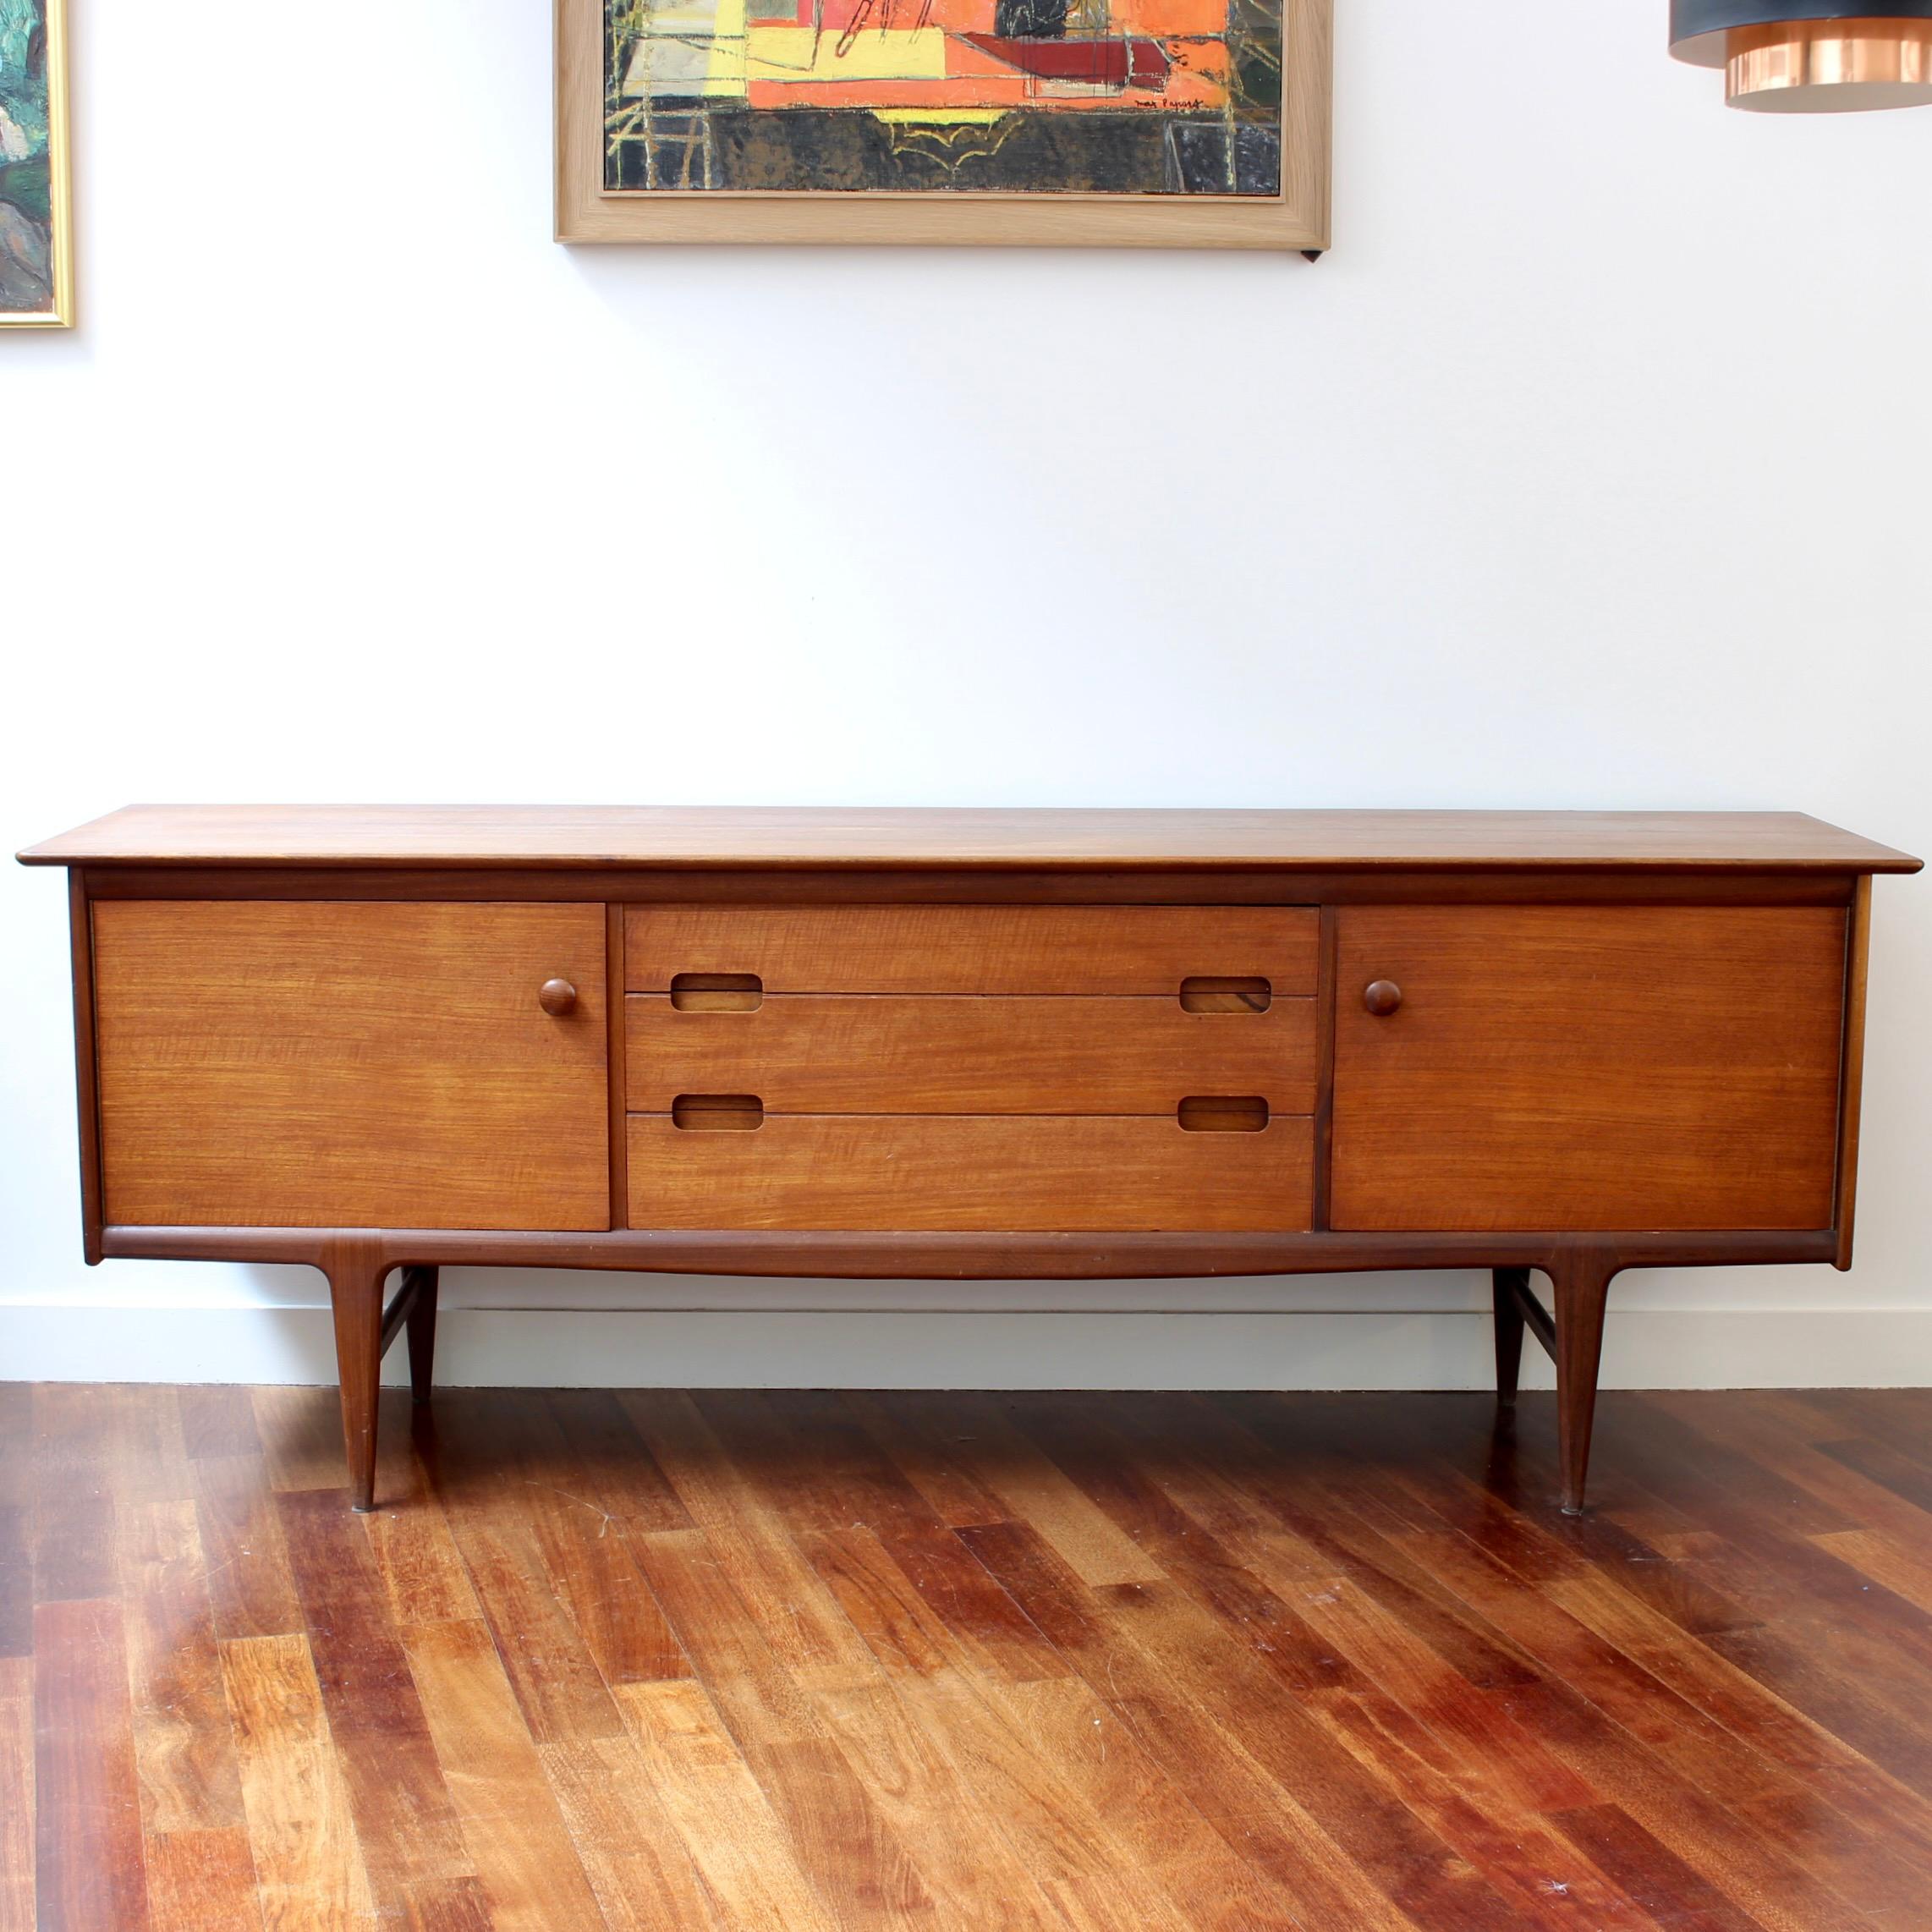 ‘Fonseca’ sideboard in teak and afrormosia wood (resembles teak) designed by John Herbert for A. Younger Ltd. (circa 1950s). This model was produced in relatively low numbers therefore rarely comes to market. There are two cupboard spaces that sit